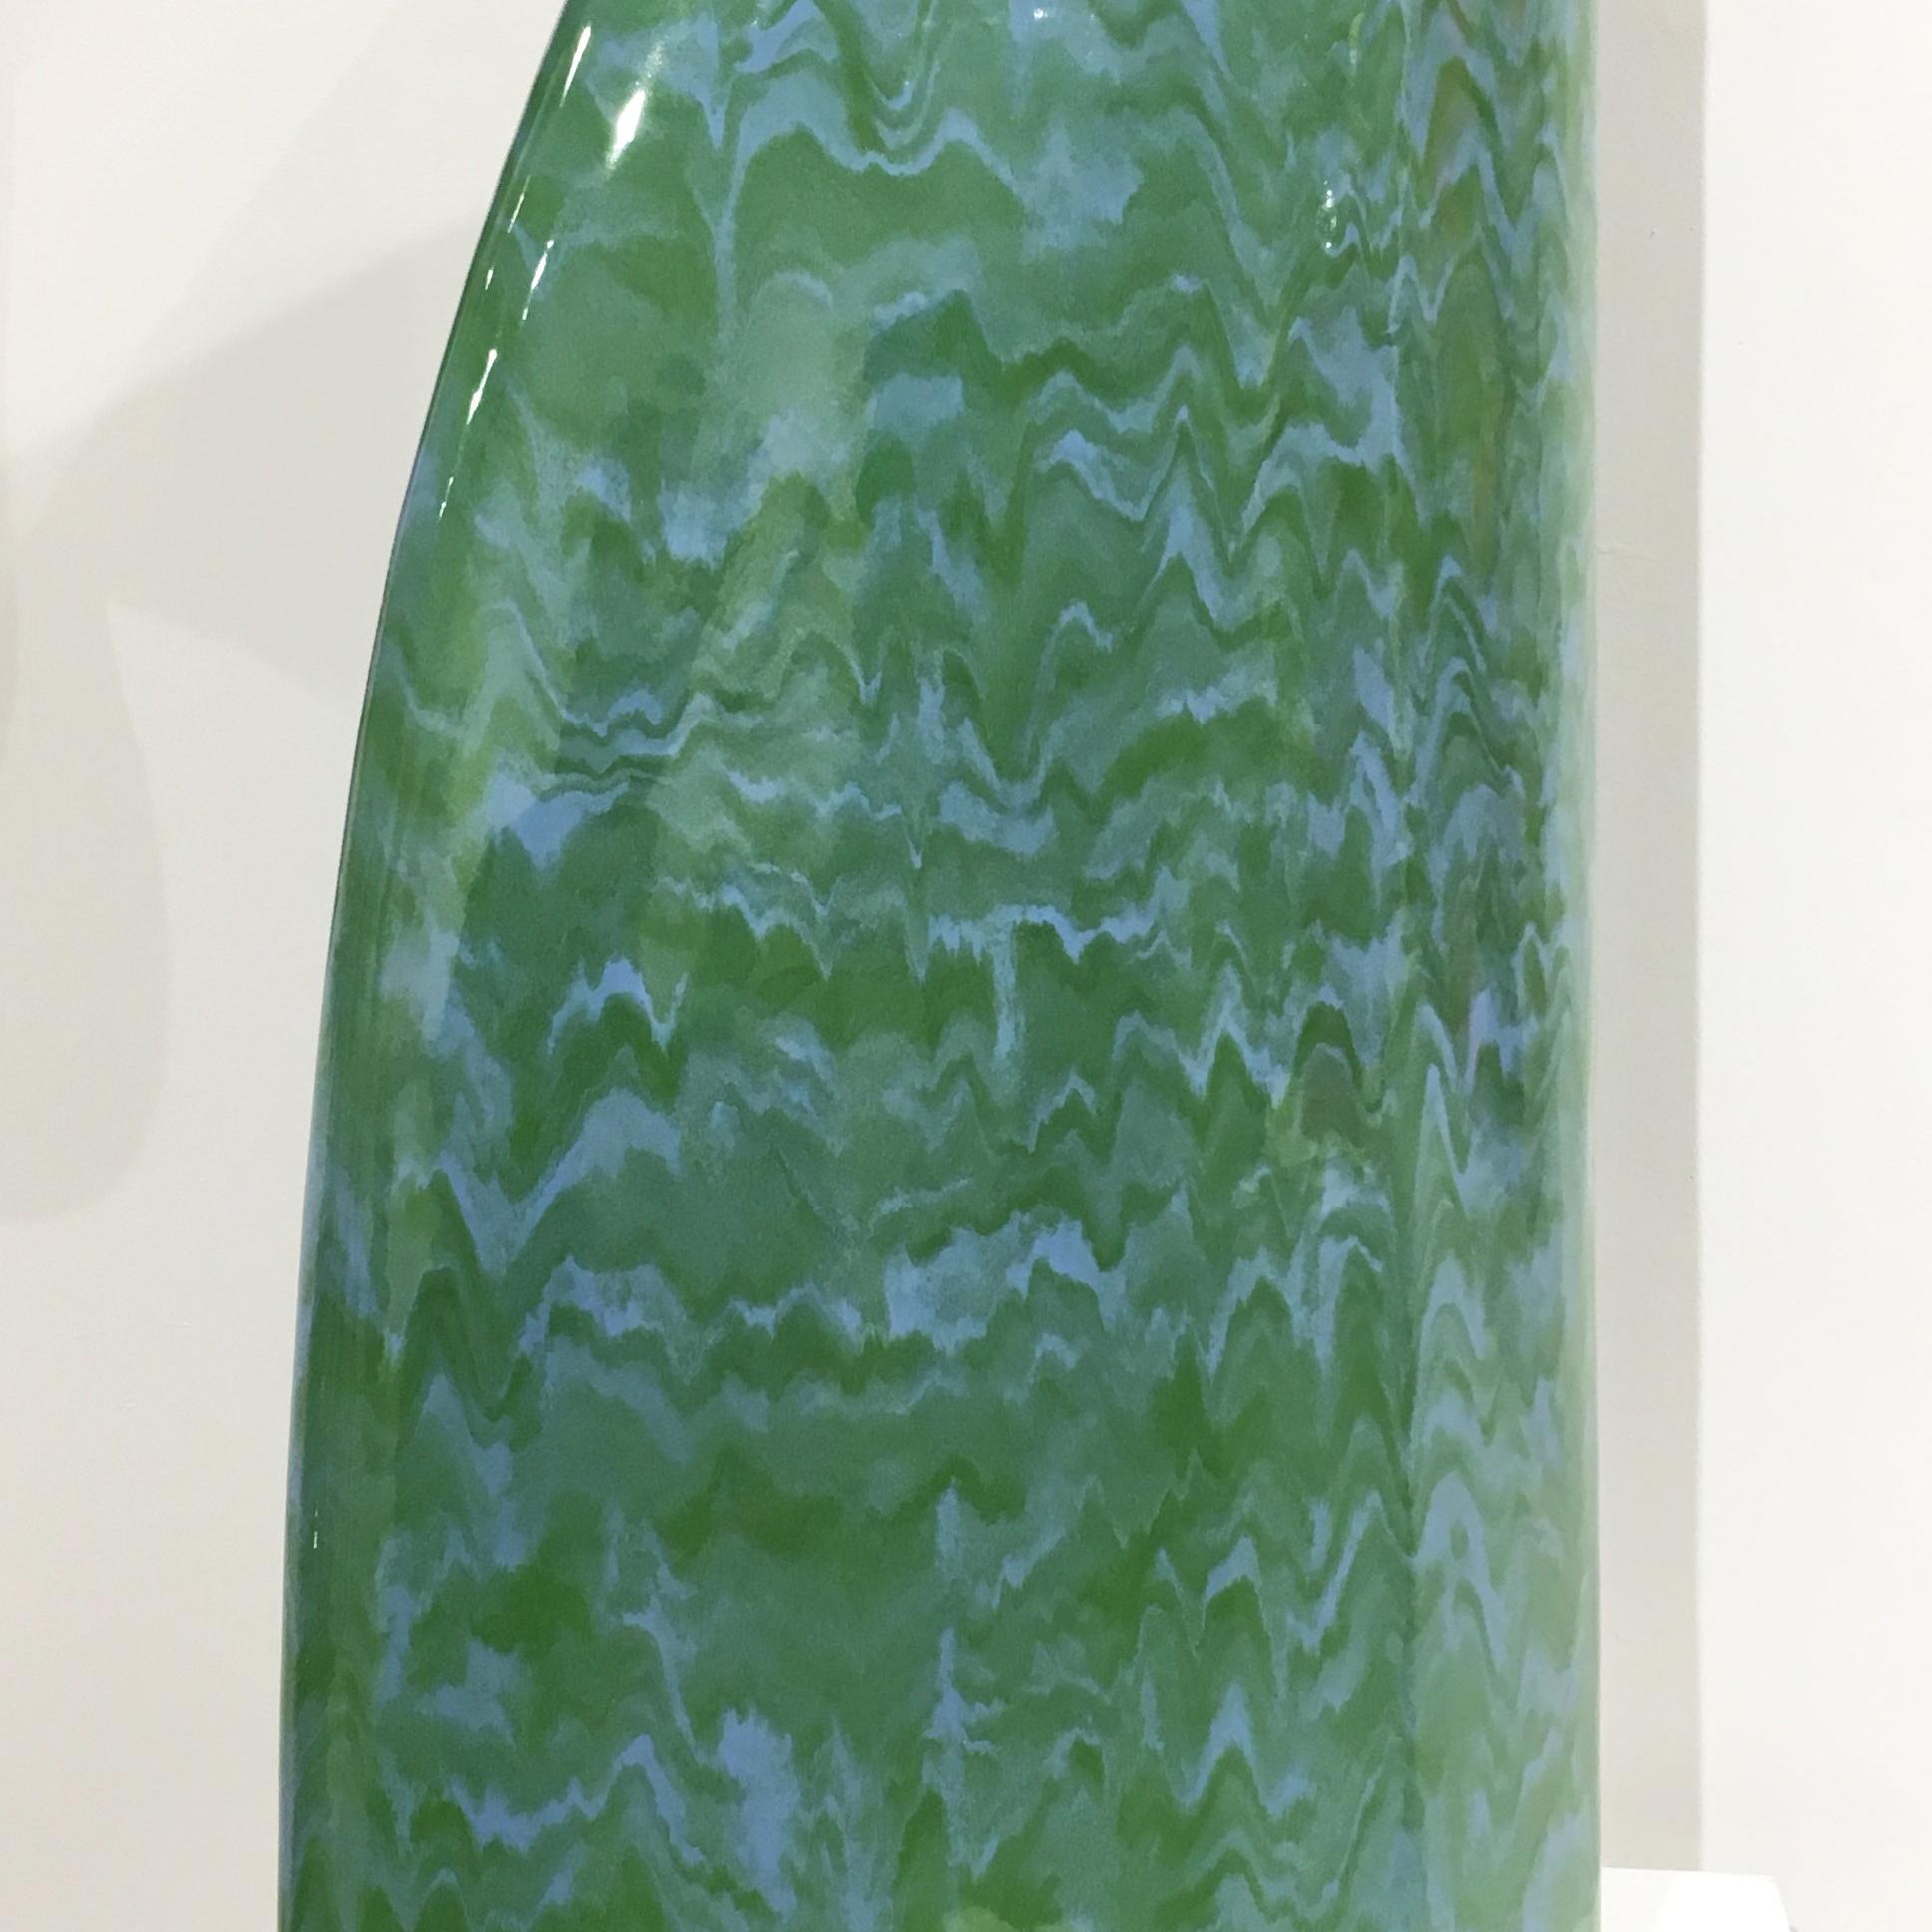 Minimalist Abstract Ceramic Sculpture with Cascading Blue and Green Glaze - Gray Abstract Sculpture by James Marshall